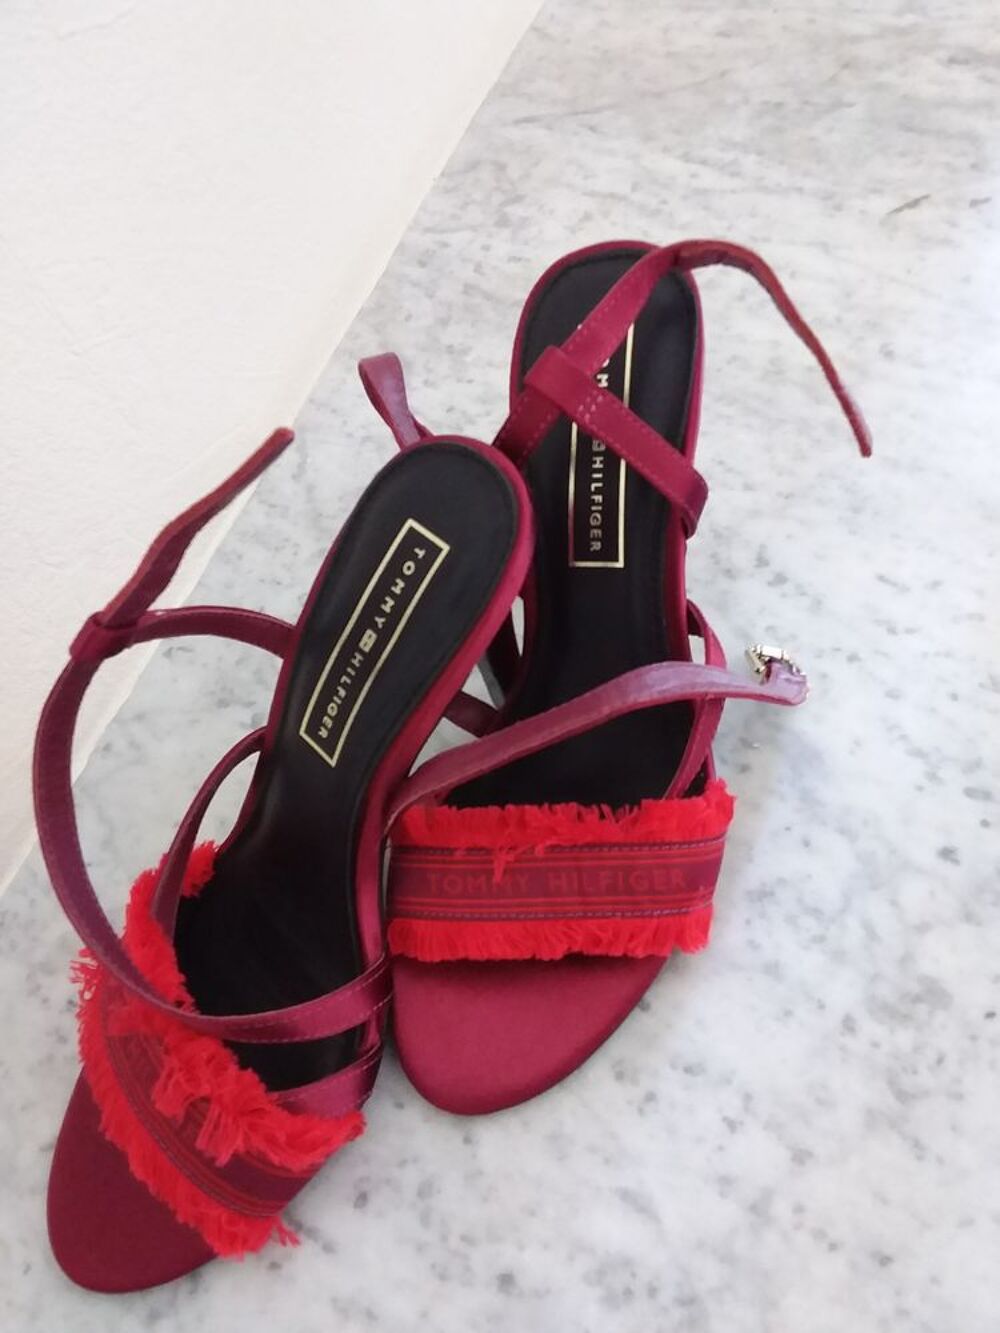 TOMMY HILFIGER PAIRE ROUGE POINTURE 38
50 EUROS Chaussures